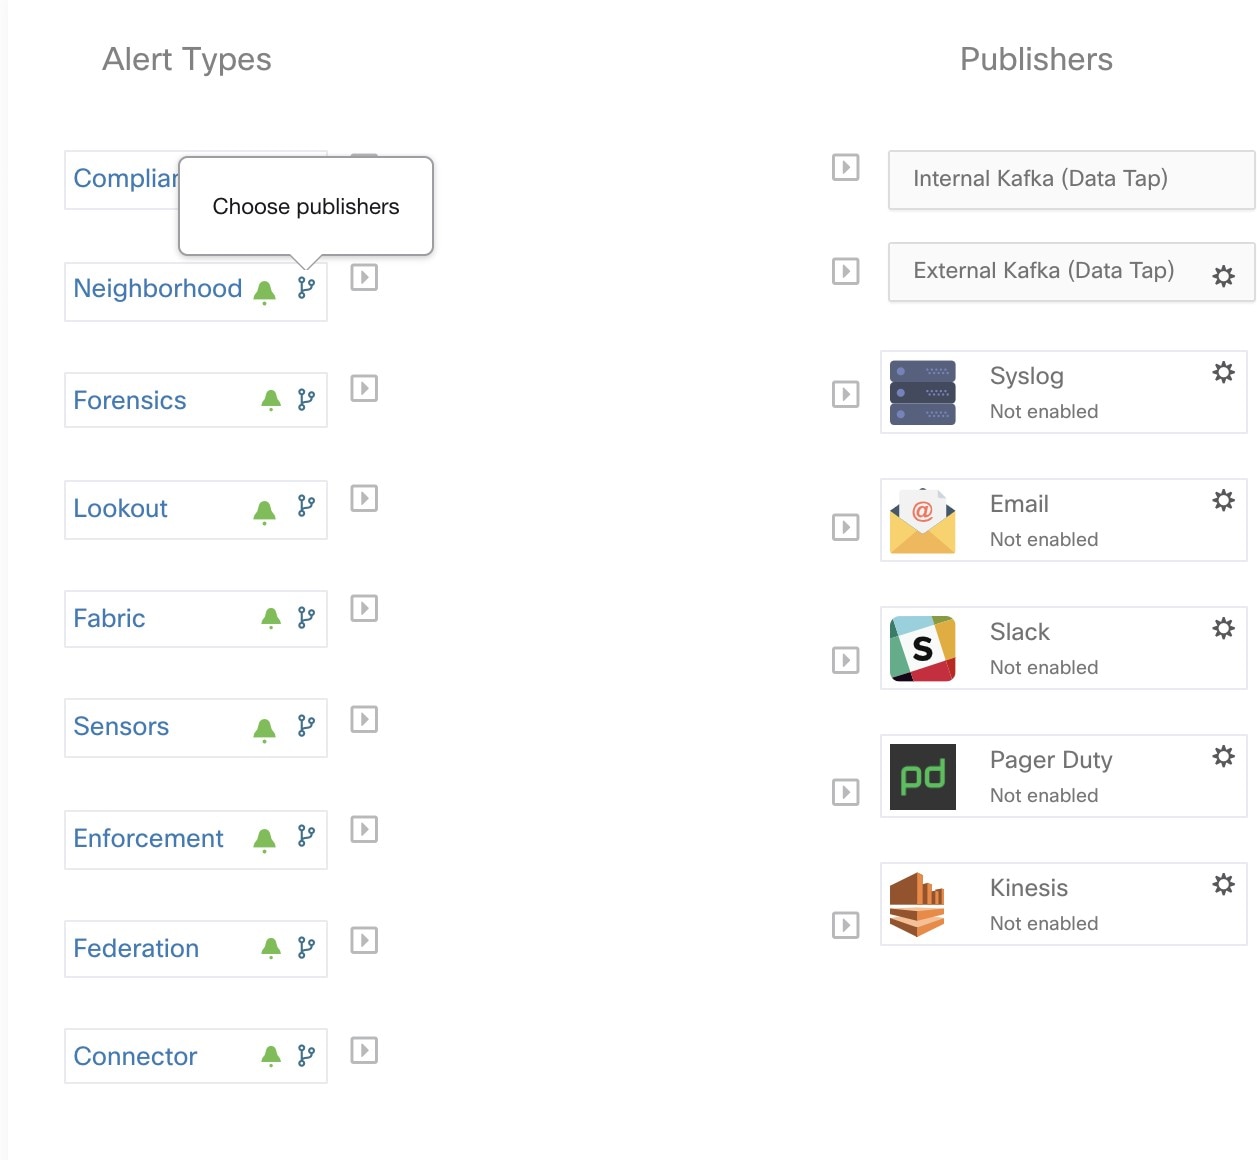 Click the button shown in the figure to open a modal to select publishers for the alert type